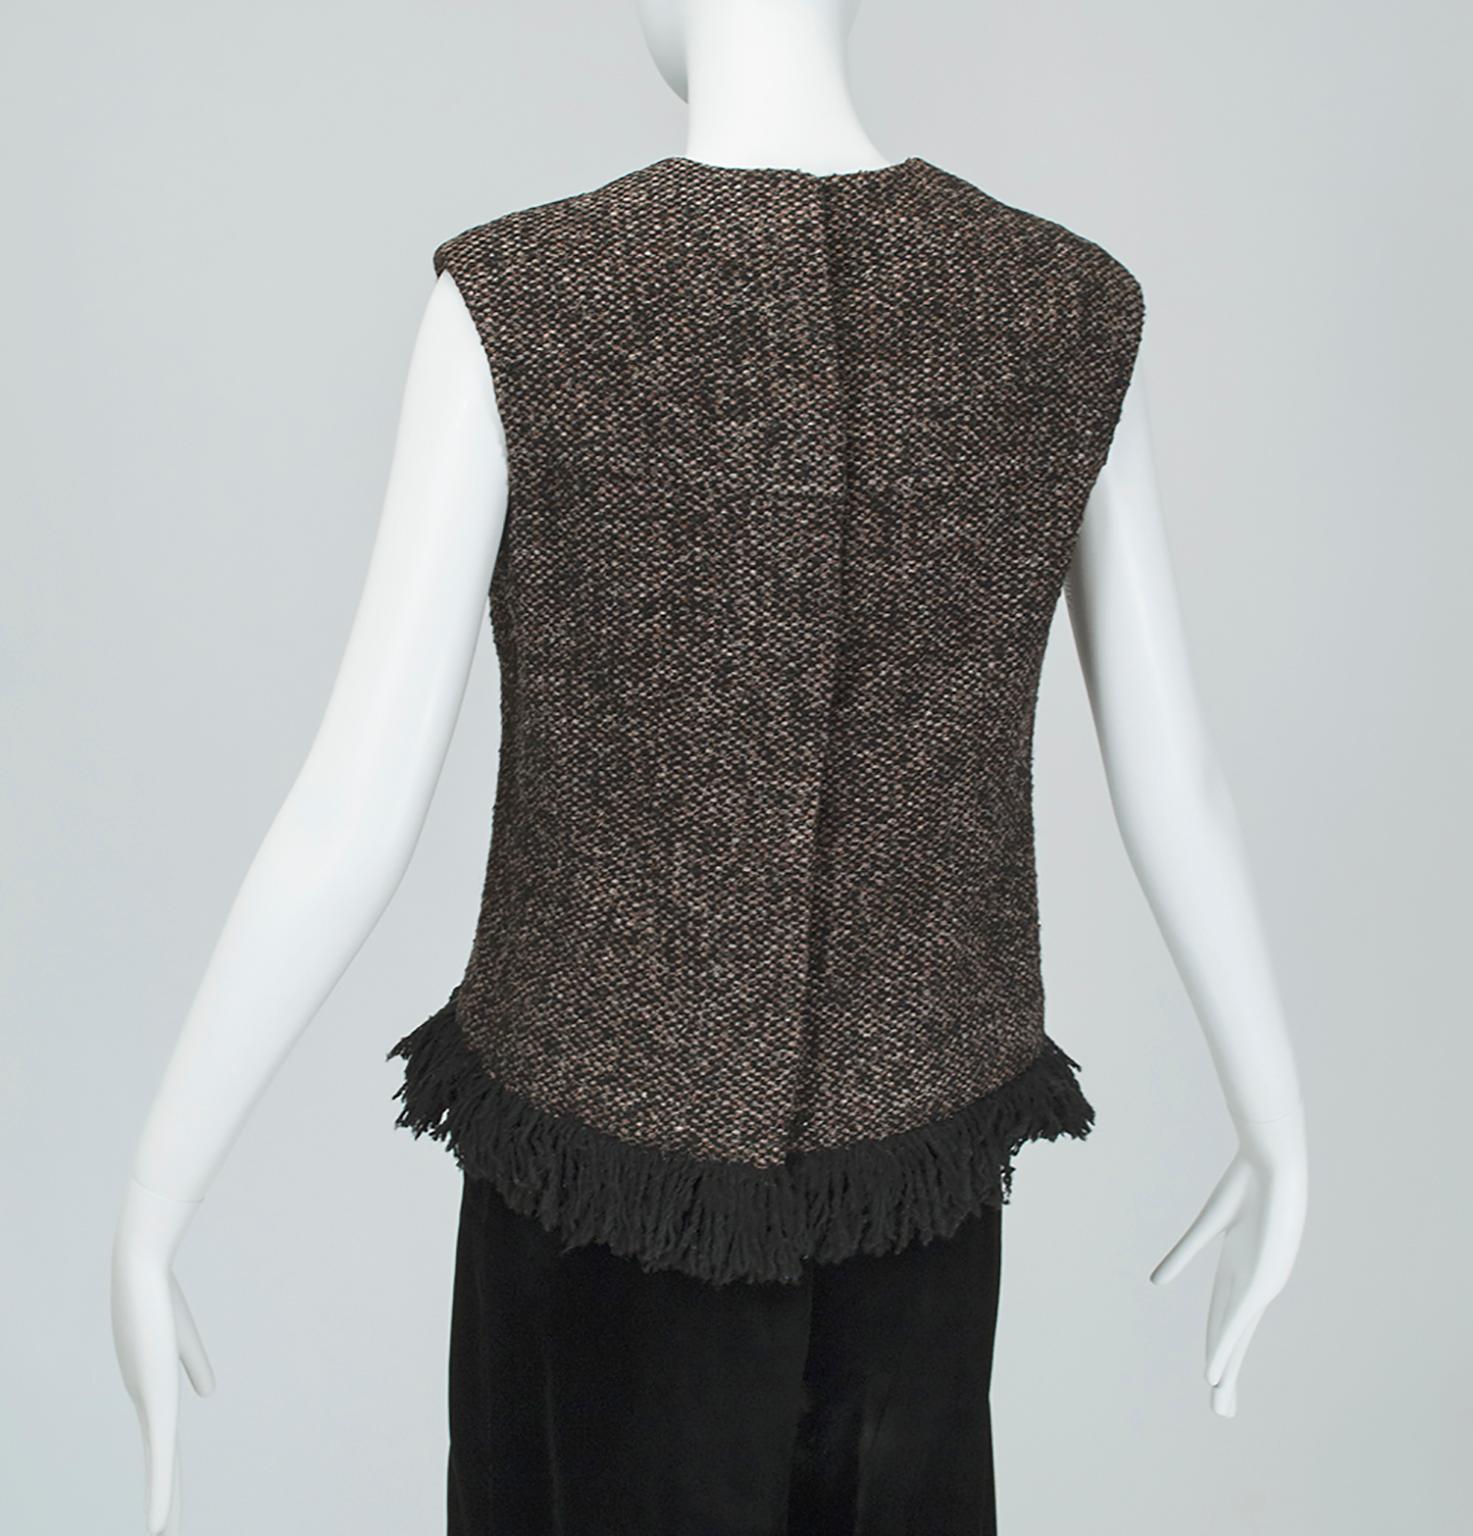 James Galanos Brown Tweed Jacket w Matching Sleeveless Fringe Top - M, 1980s For Sale 1